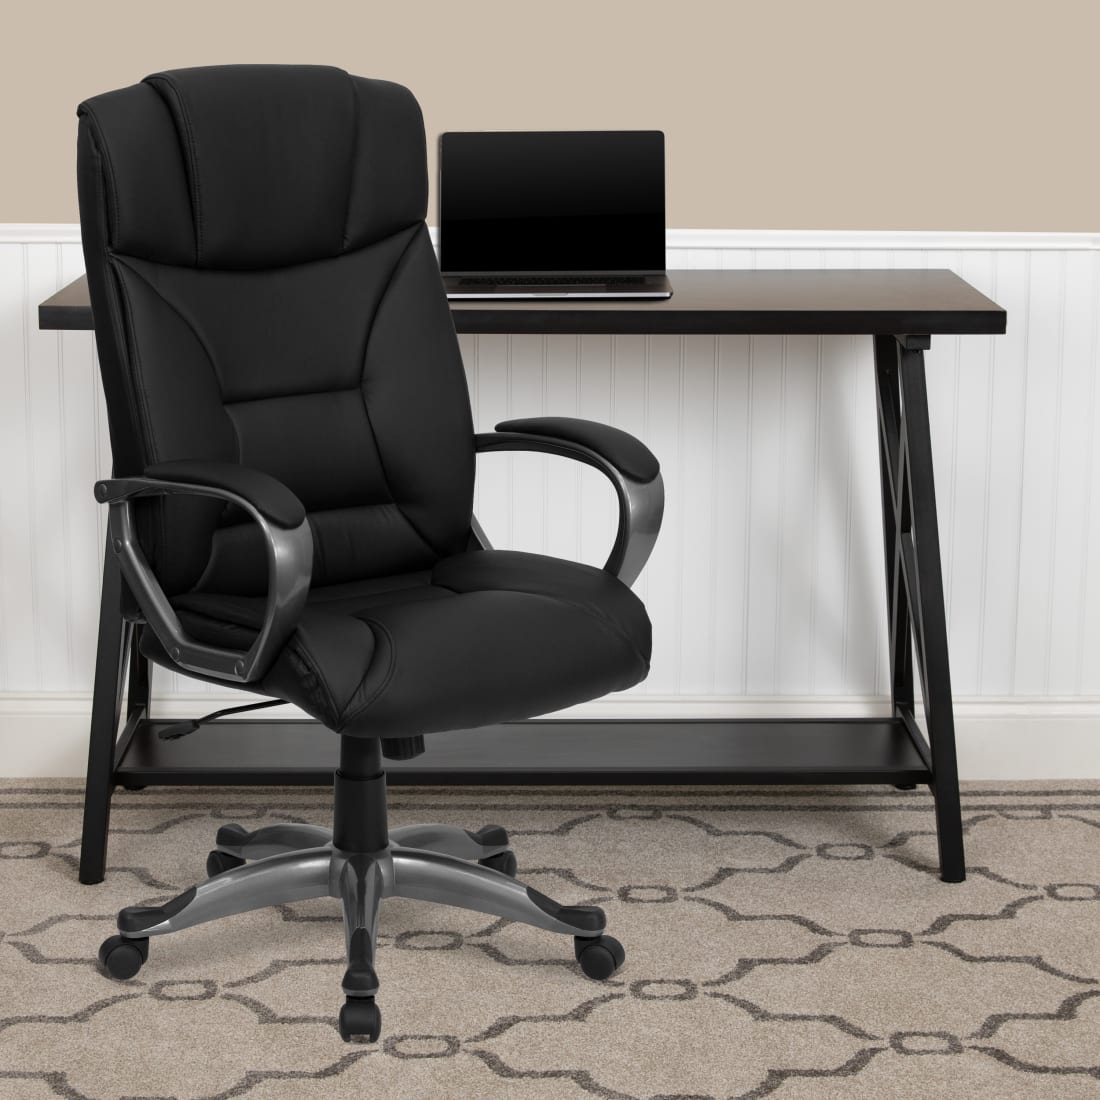 High Back Black LeatherSoft Executive Swivel Office Chair with Arms - BT9177BKGG